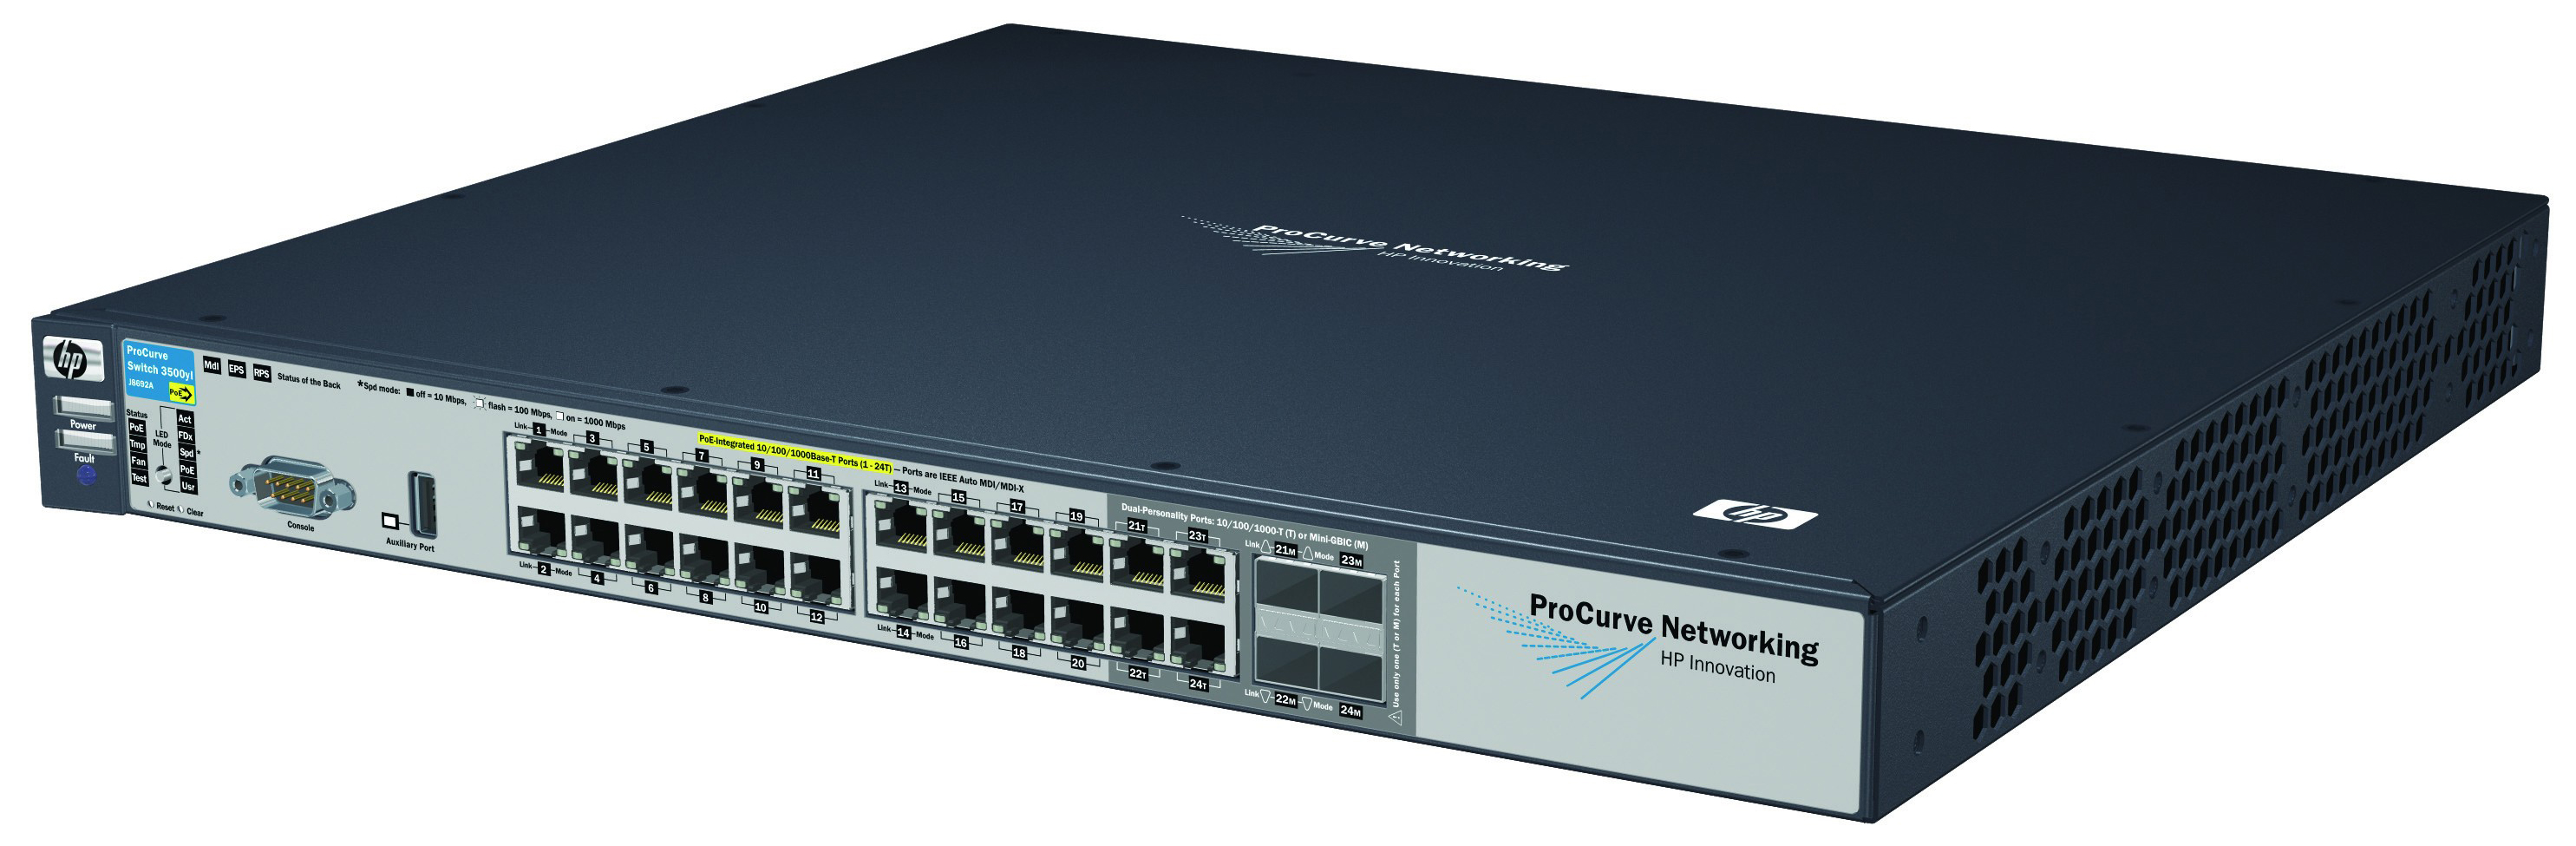 J8692A HP ProCurve 3500YL 24G-Power Intelligent Edge 24-Ports 10/100/1000Base-T LAN Stackable Ethernet Switch with 4x SFP (mini-GBIC) 1 x Expansion Sl (Refurbished)